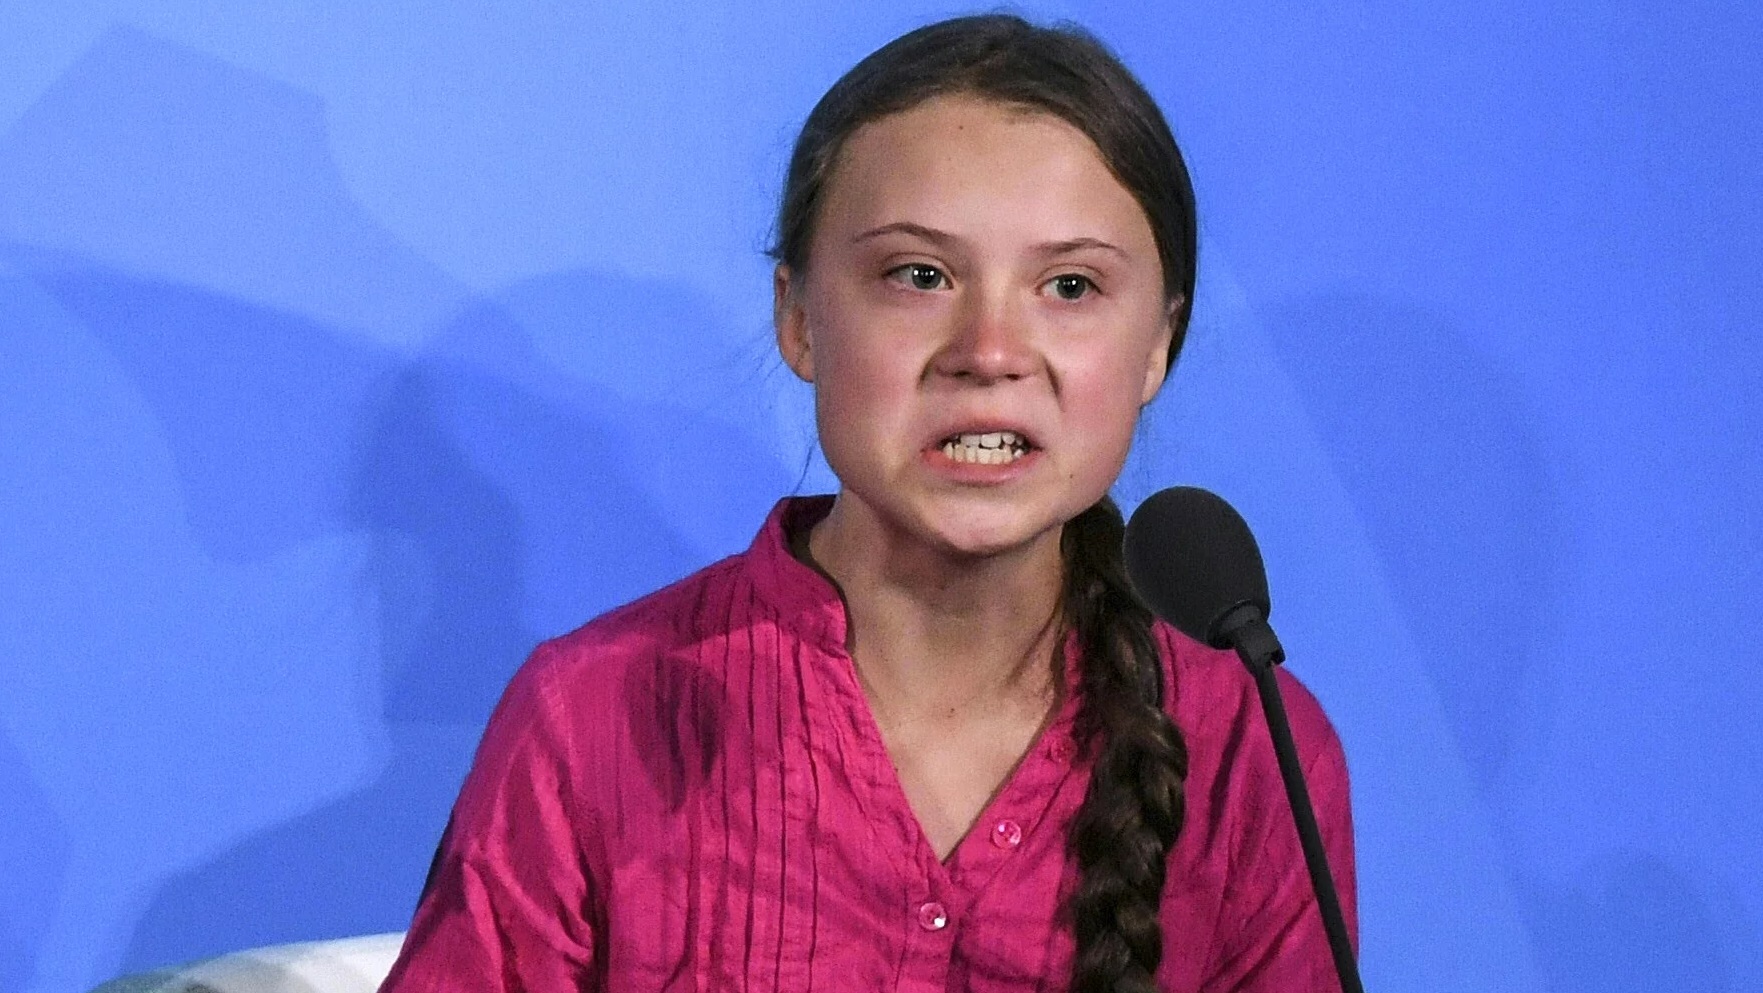 Image: Enviro-tyrant Greta Thunberg wins TIME Person of the Year, joining Hitler, Stalin, and Obama